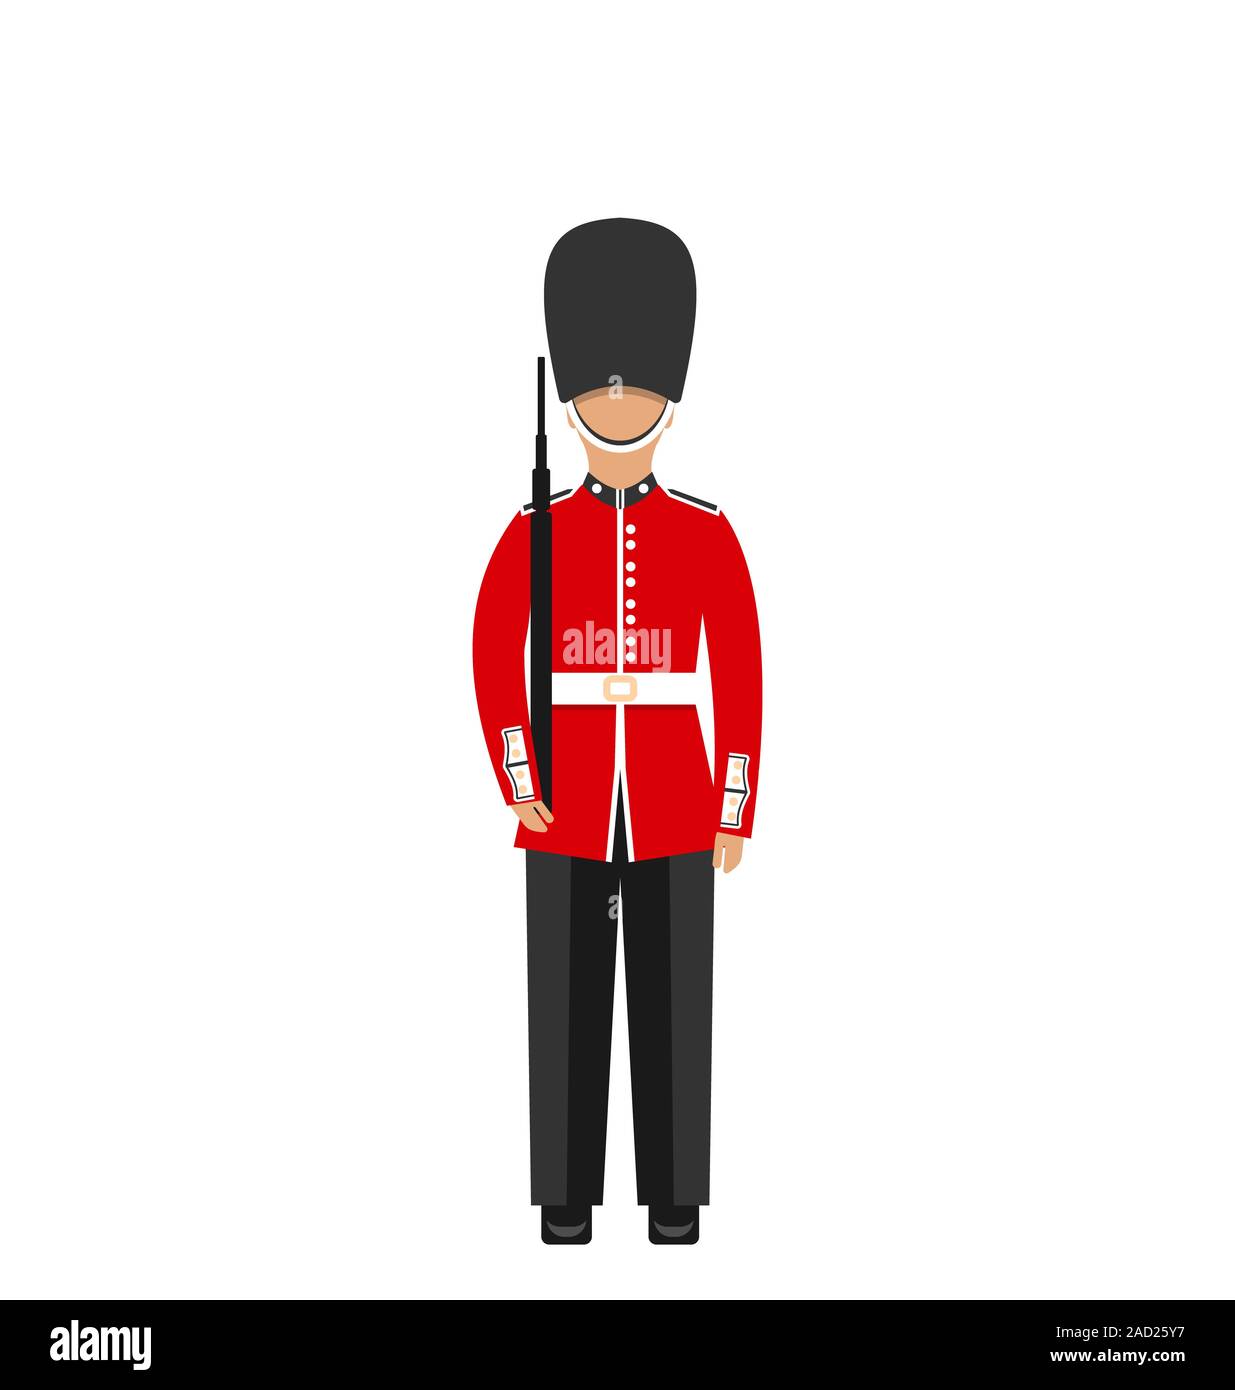 Queen's Guard. Man in Traditional Uniform with Weapon, British Soldier Stock Photo